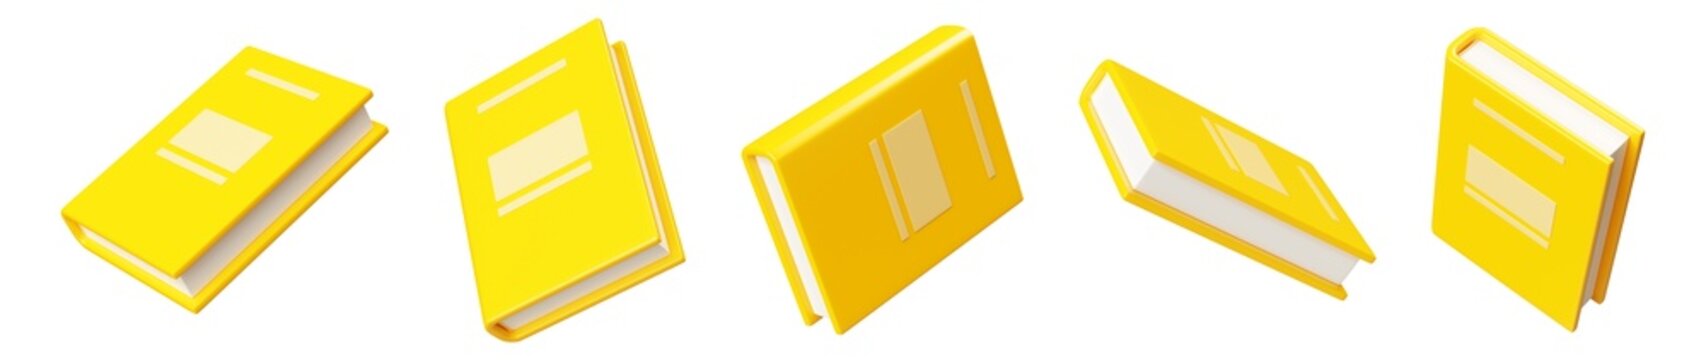 Close paper book with yellow hard cover flying in air in different angles of view. 3d render